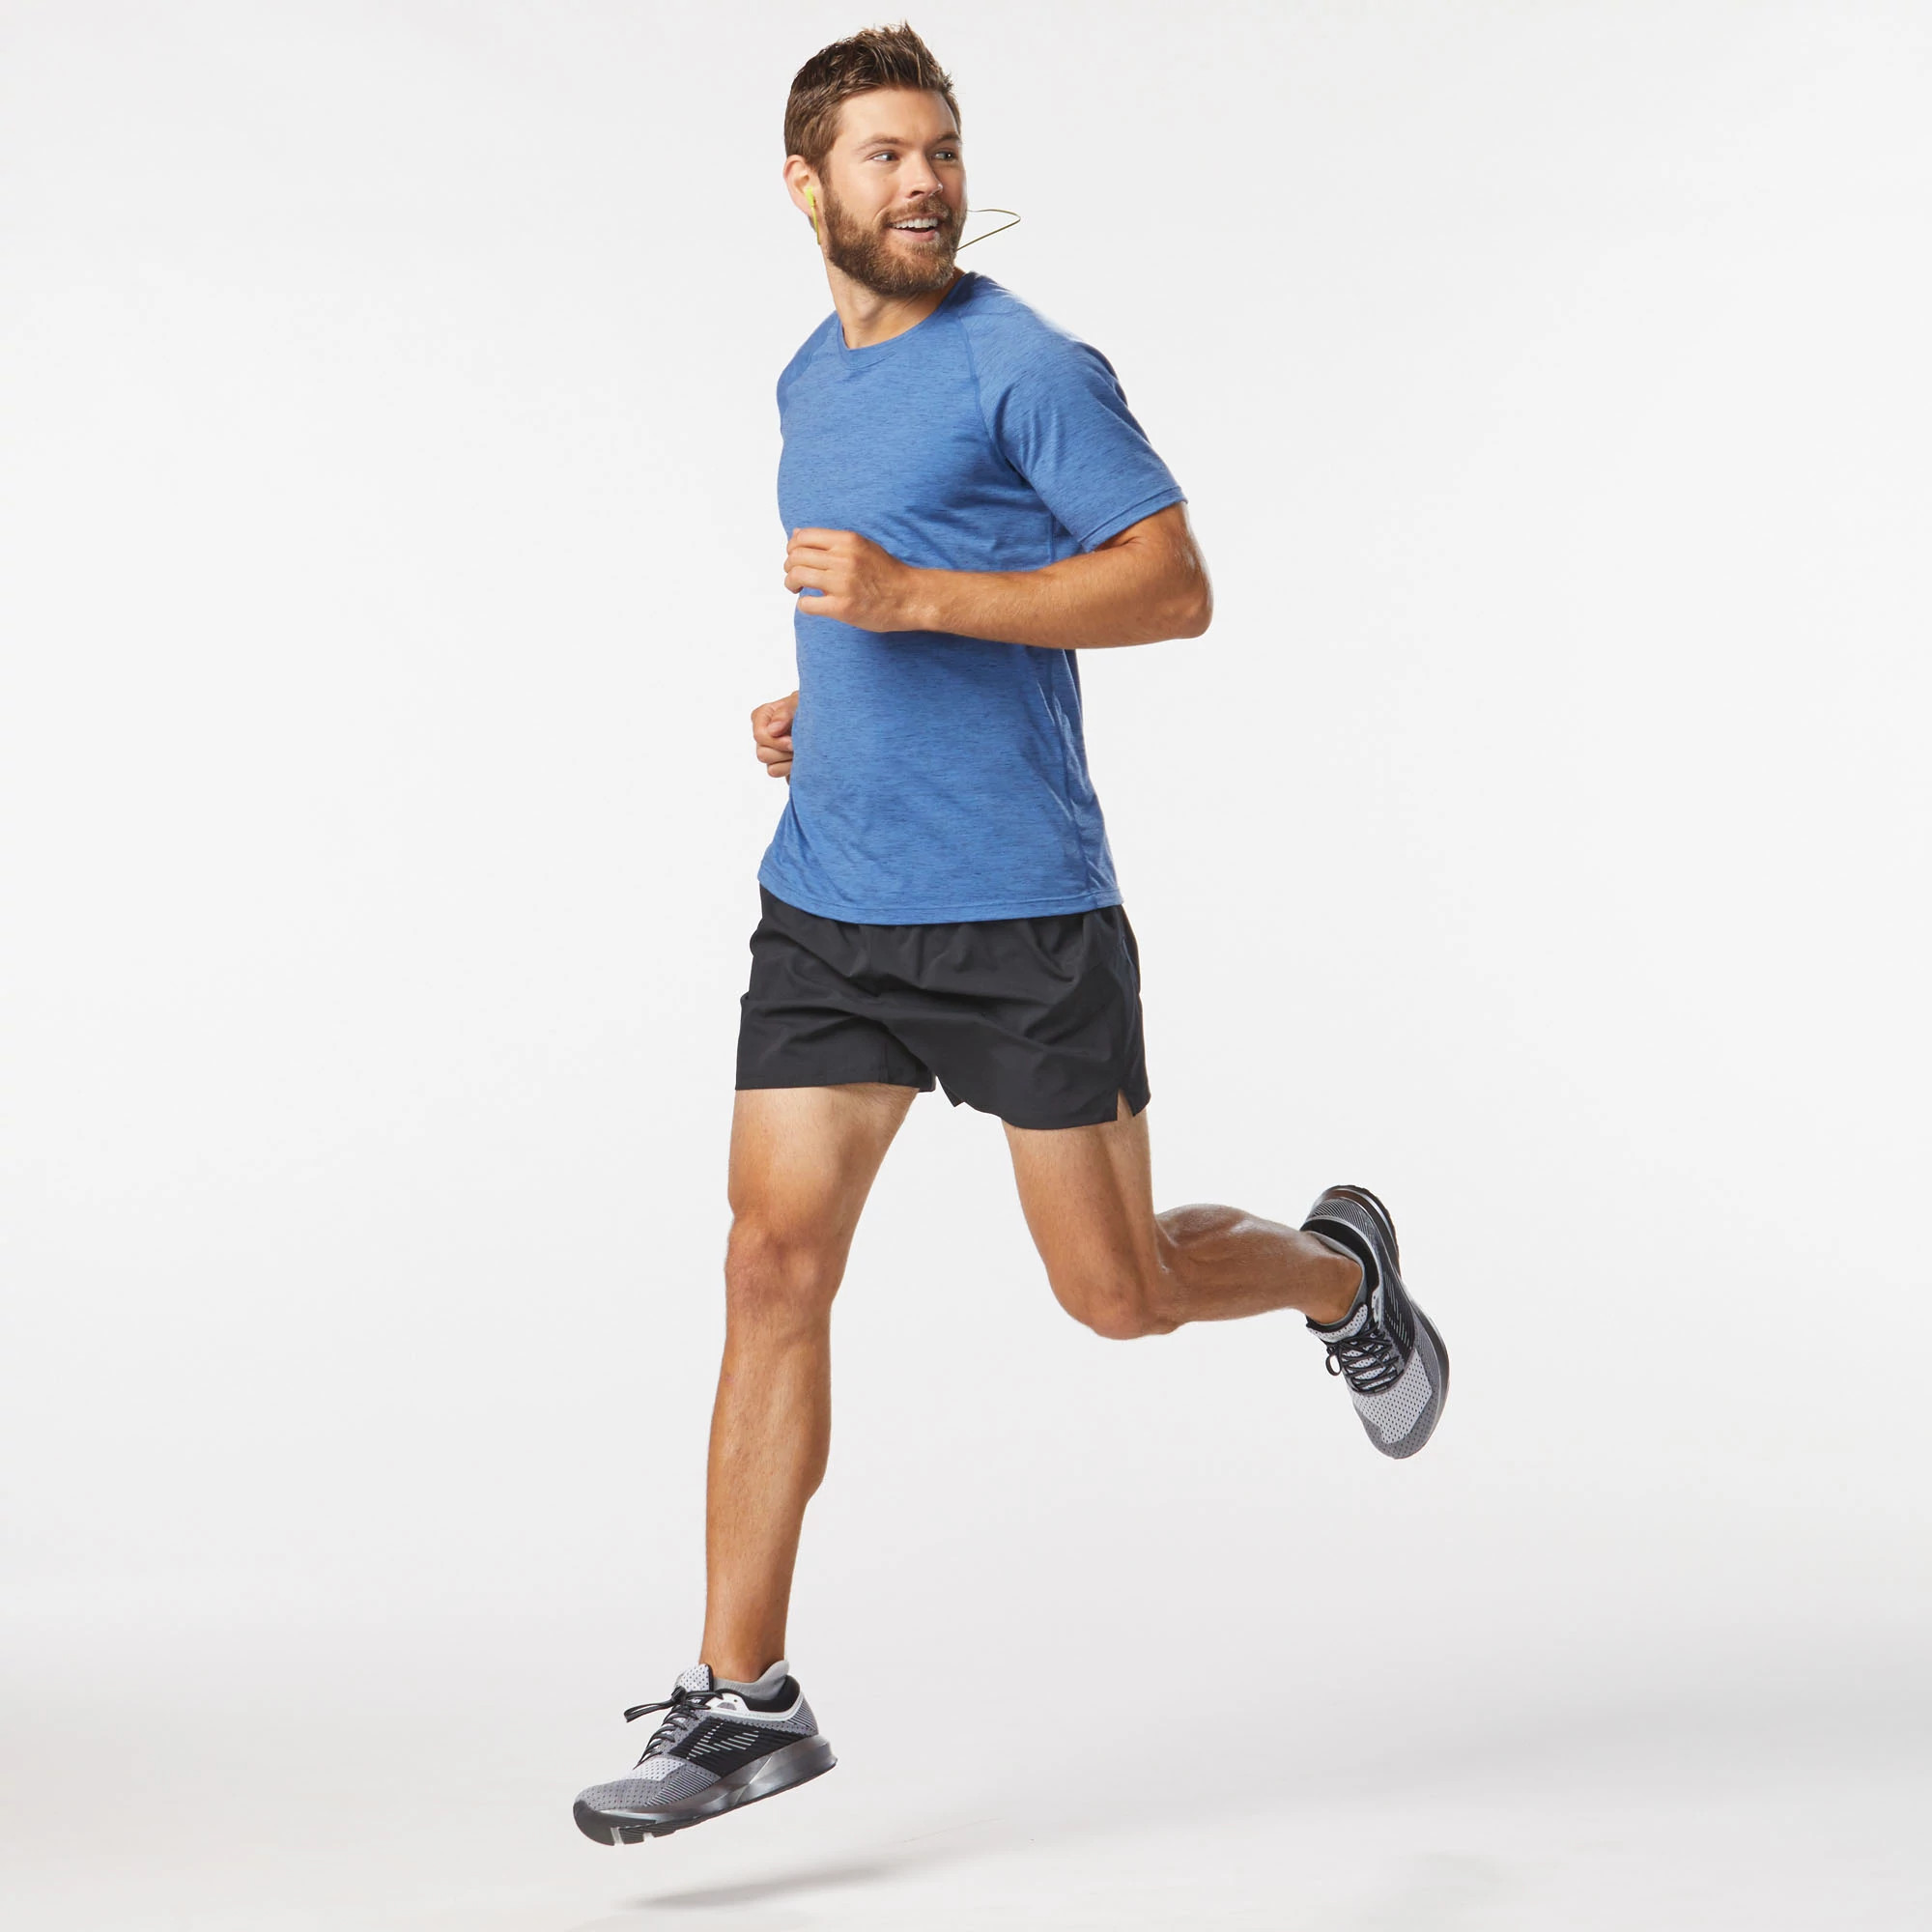 Gear Review: On Running Shorts 2021